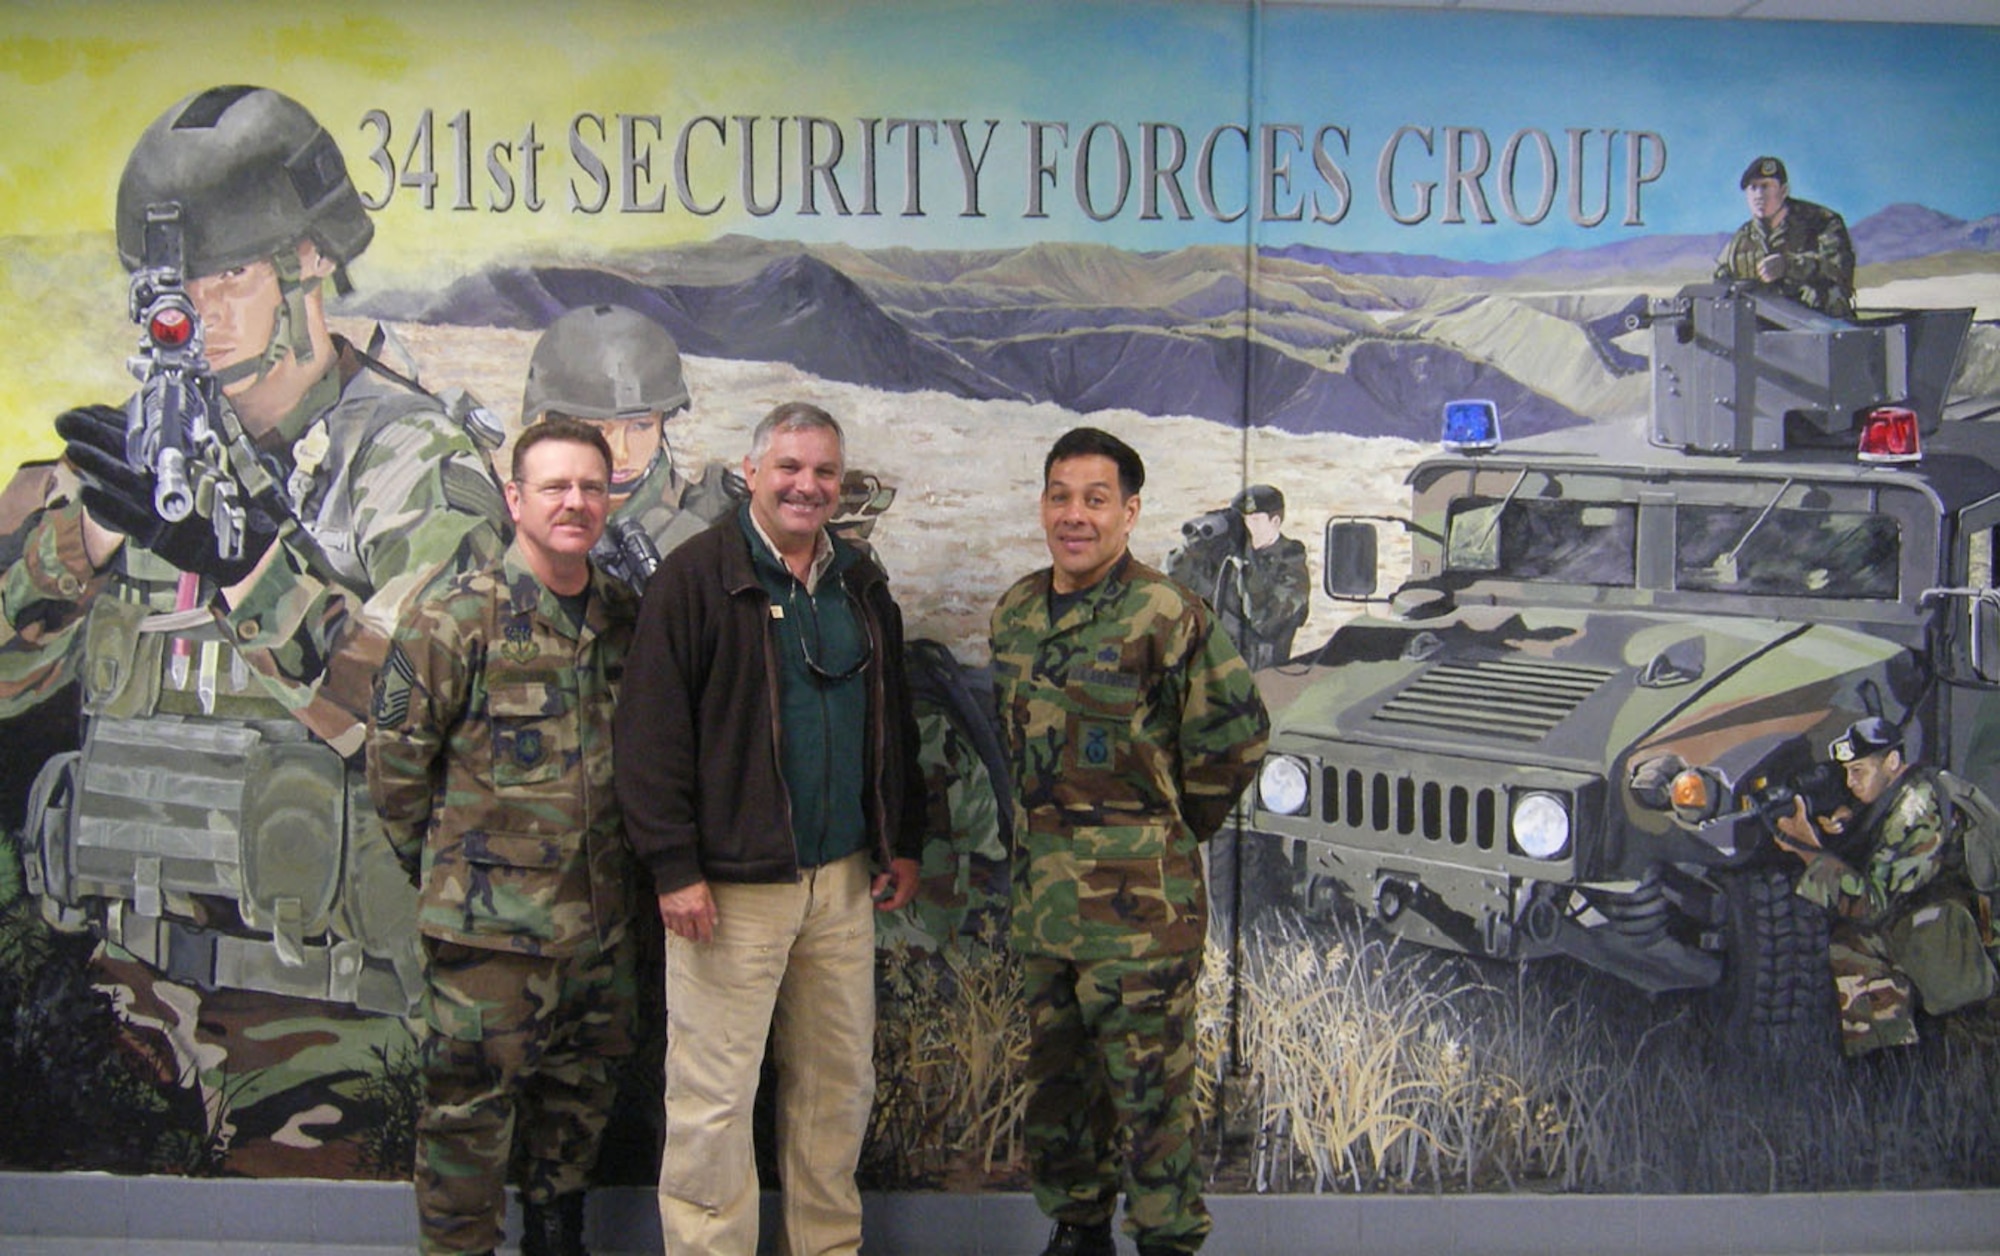 Left to right, Chief Master Sgt. Larry Wilson, 341st Security Forces Group manager; Mark Schaefer, BLM park ranger; and Col. Steve Asher, 341st SFG commander, pose in front of the wall mural in the building 500 basement – home of the 341st SFG. (U.S. Air Force photo)